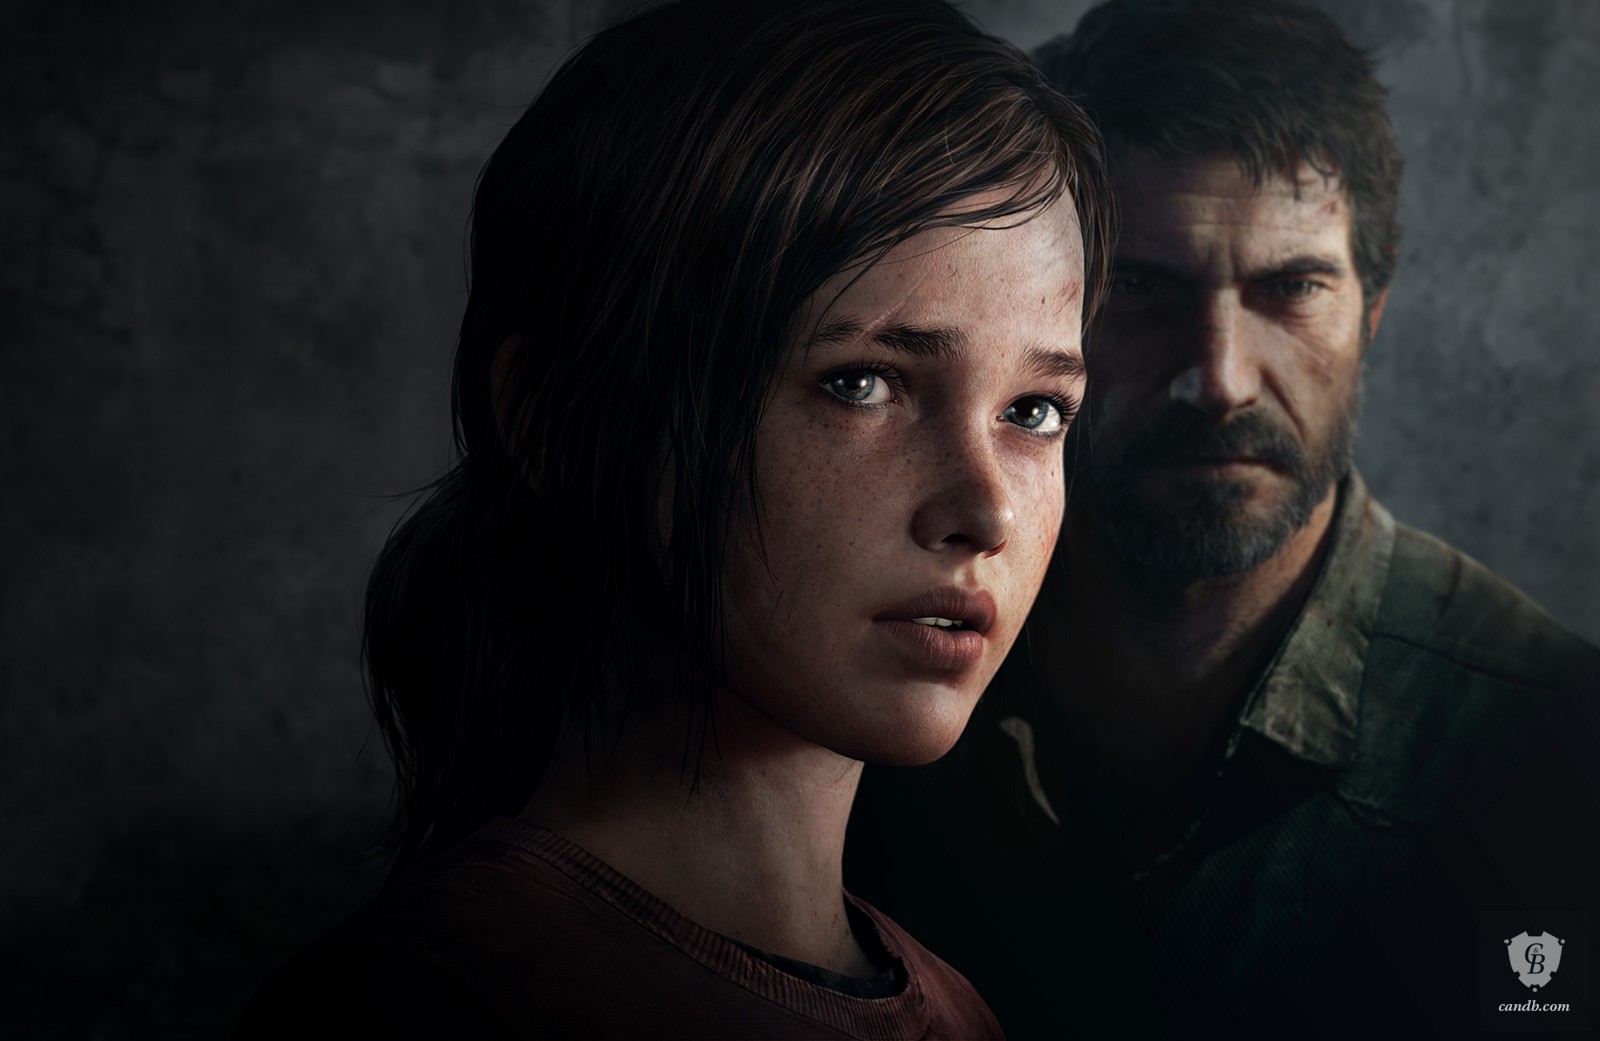 Ласт оф юс. The last of us 1. Джоэл the last of us.